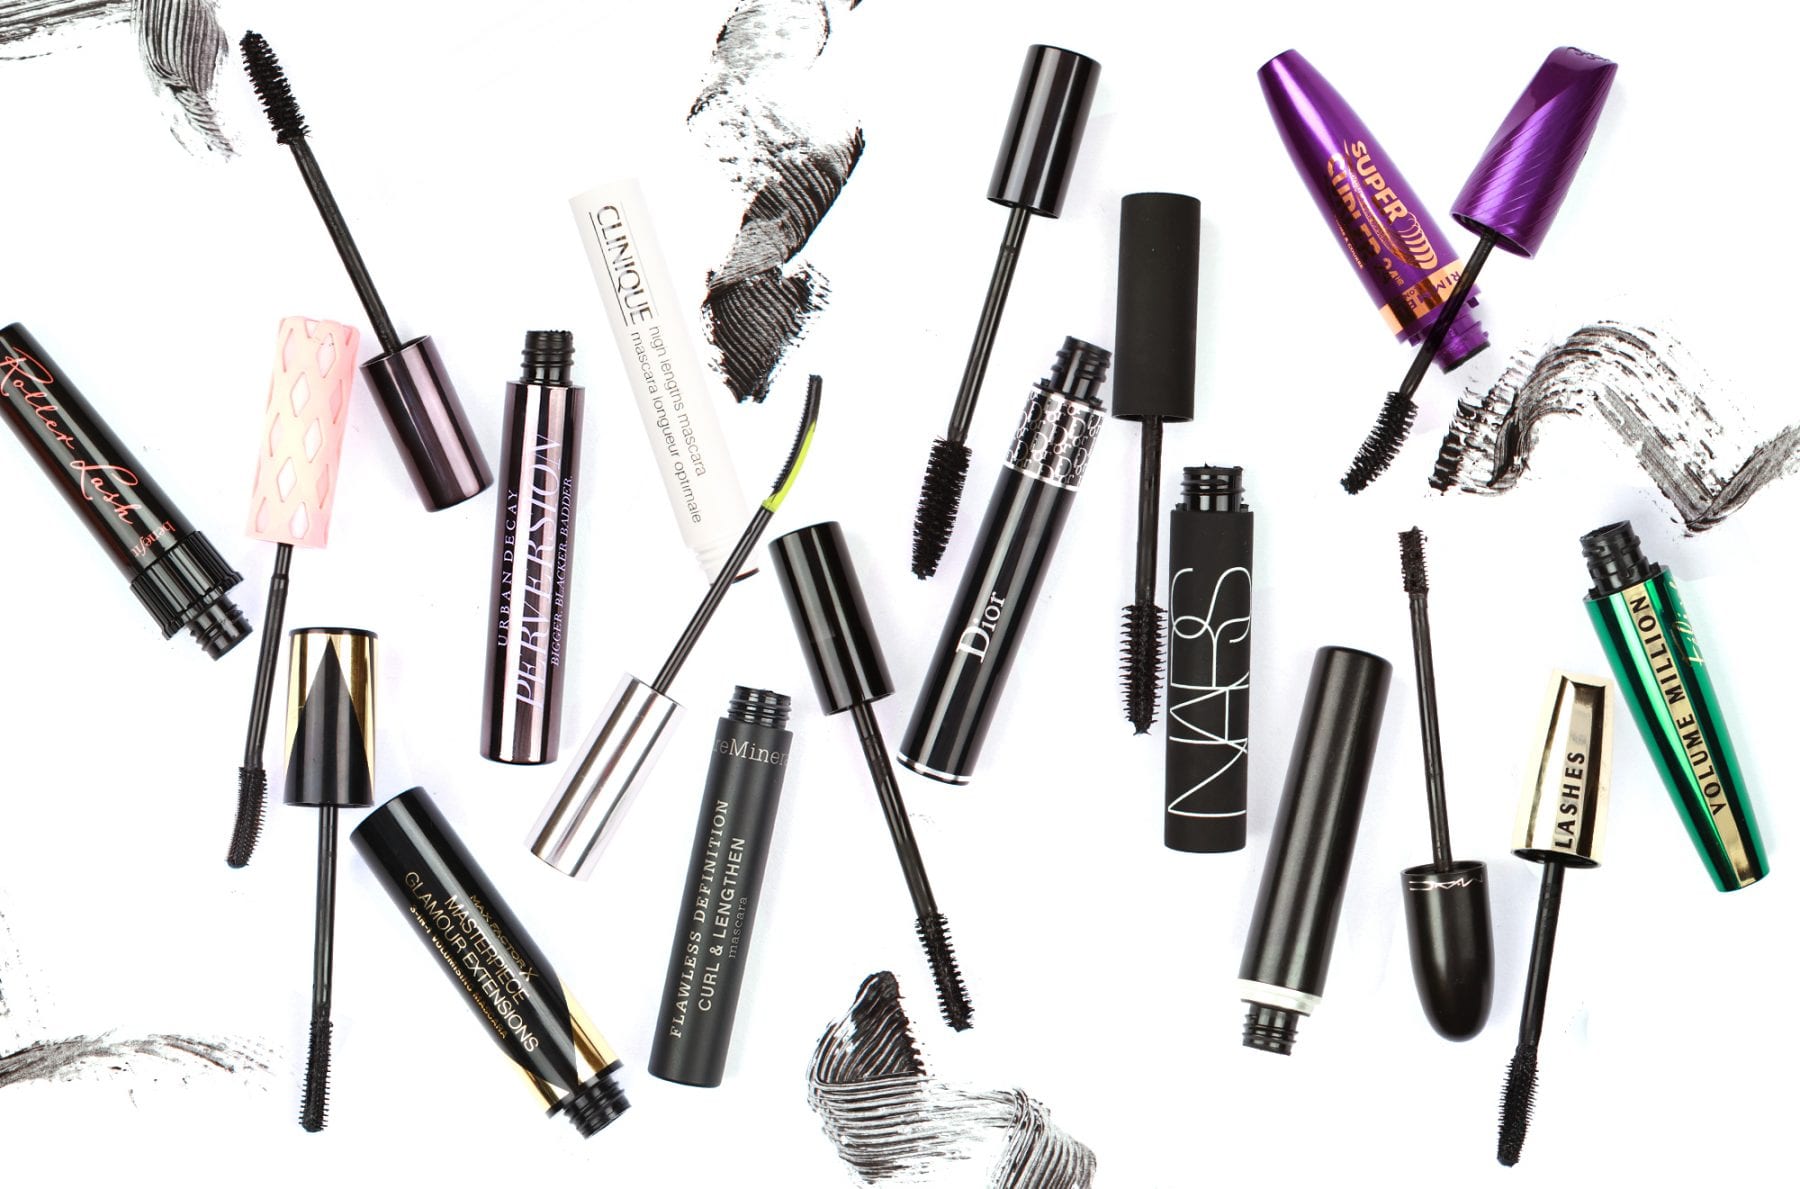 Find The Best Mascara To Lengthen Your Lashes